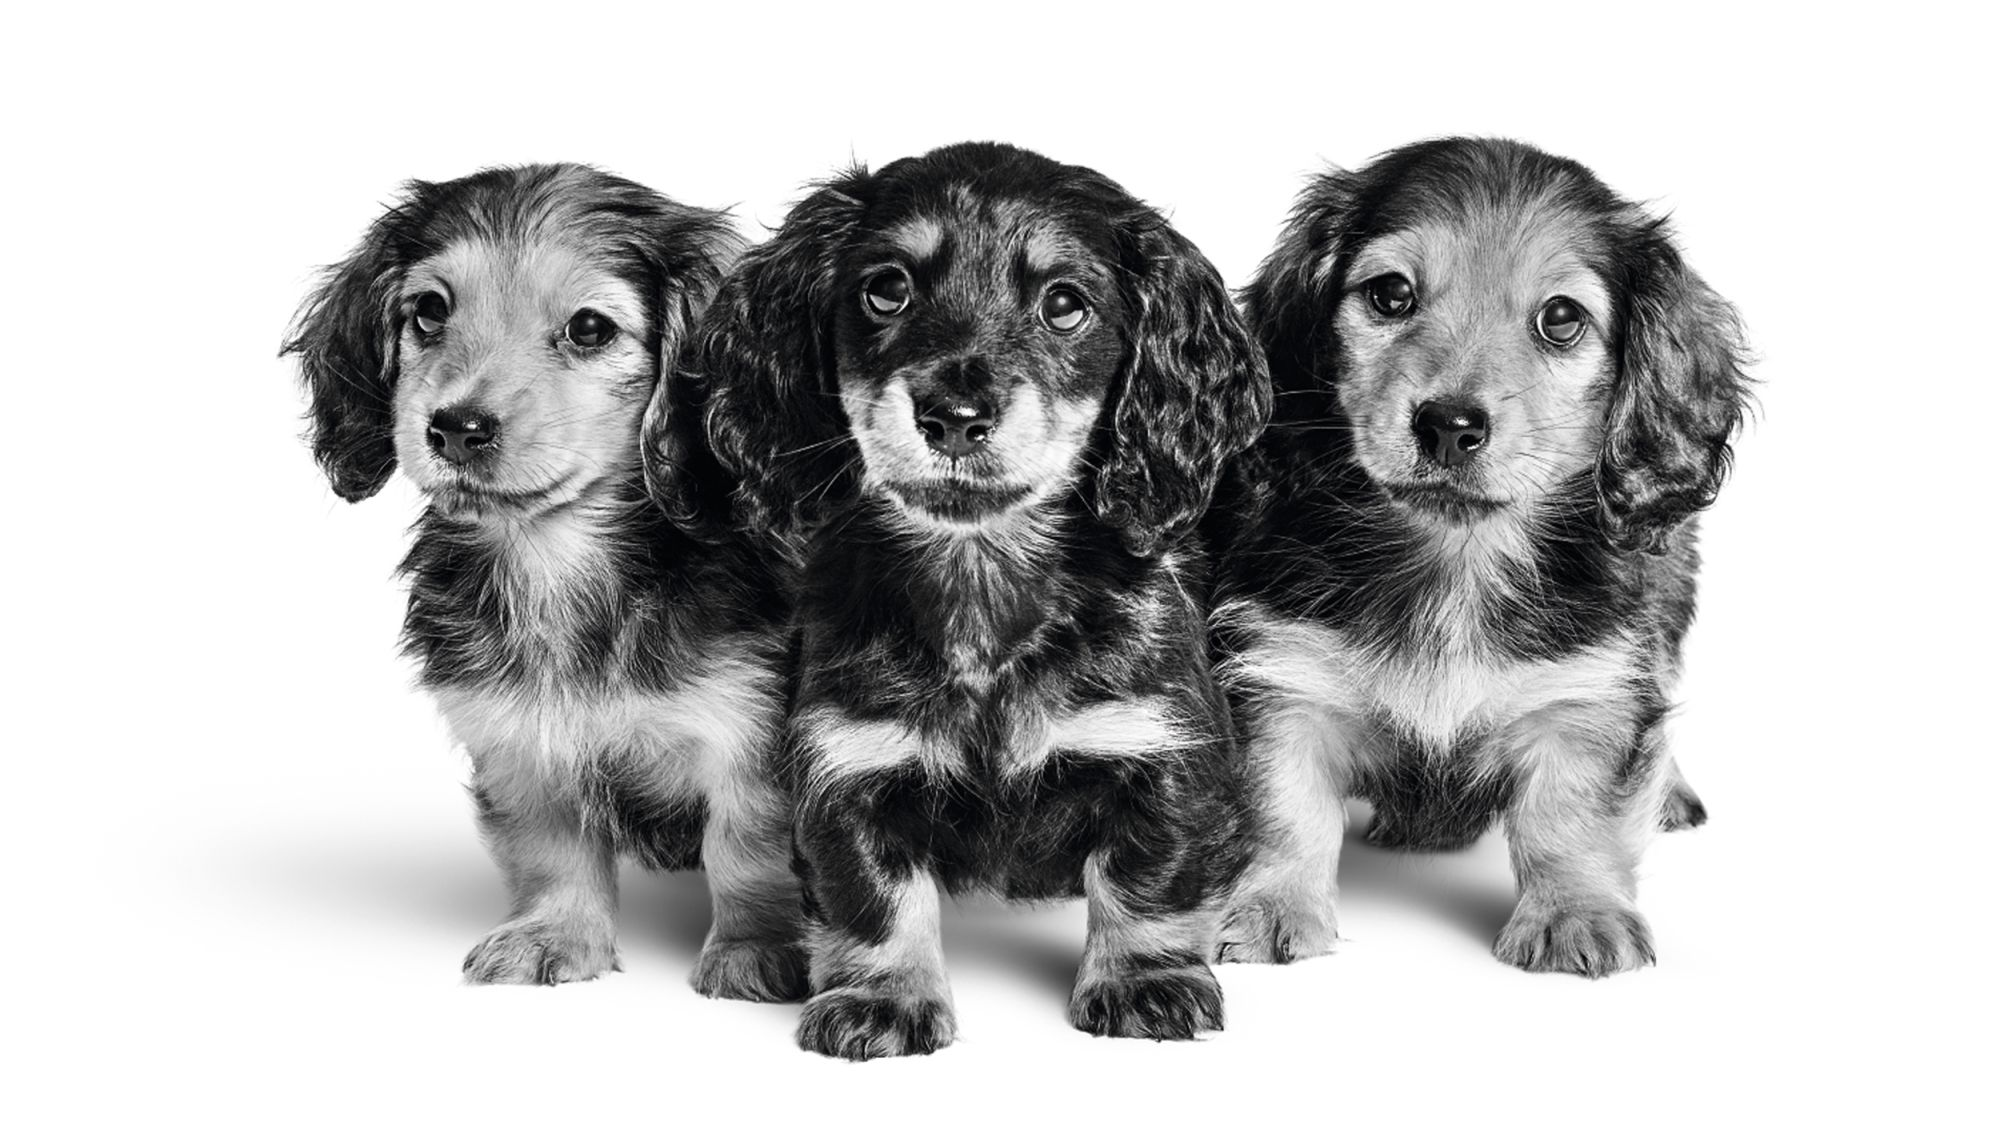 Dachshund puppies in black and white